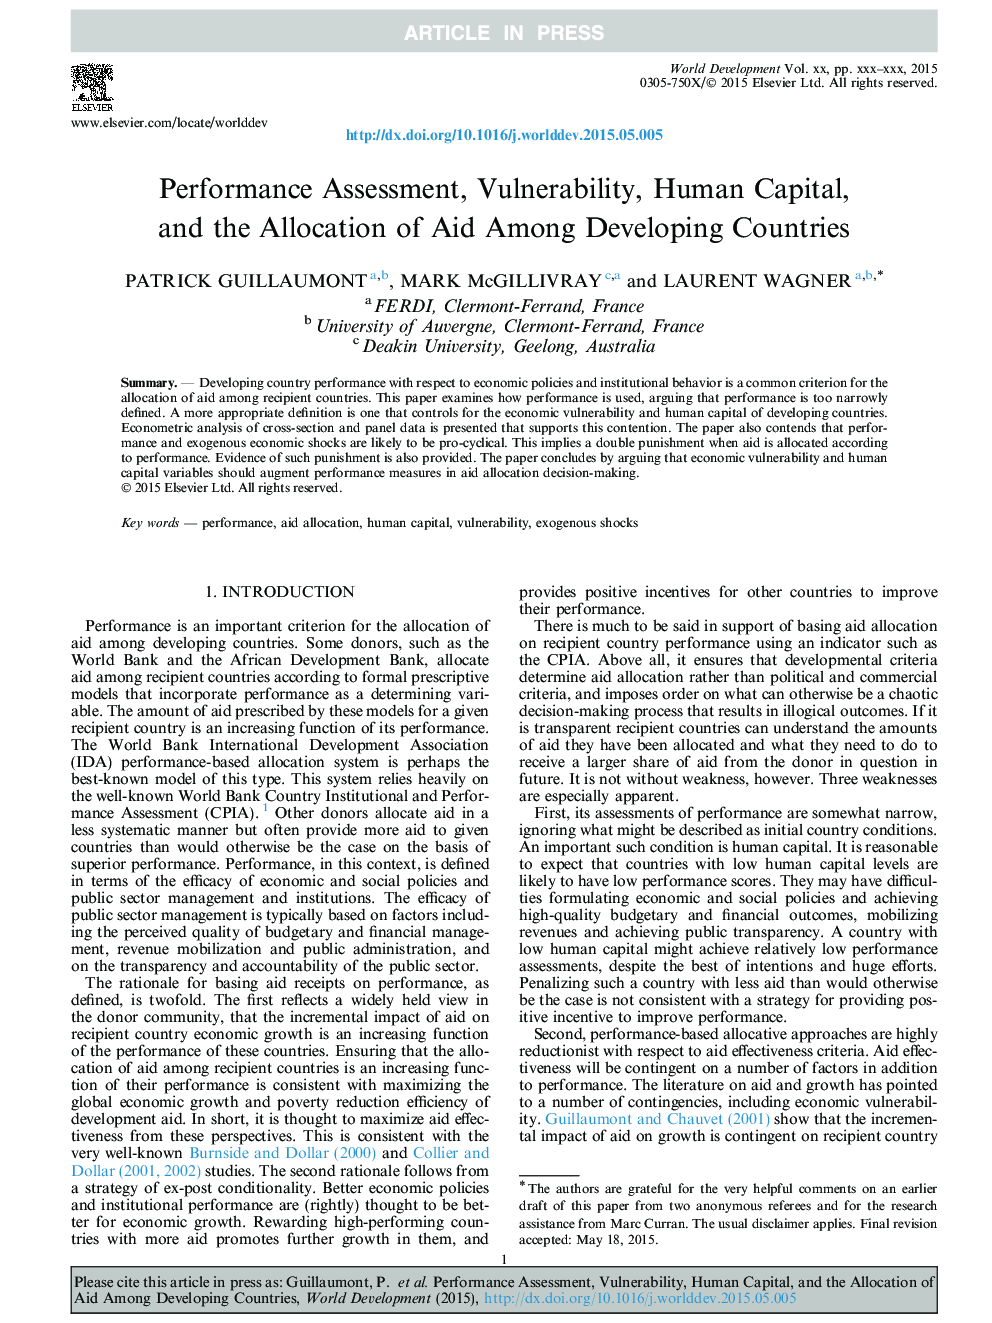 Performance Assessment, Vulnerability, Human Capital, and the Allocation of Aid Among Developing Countries